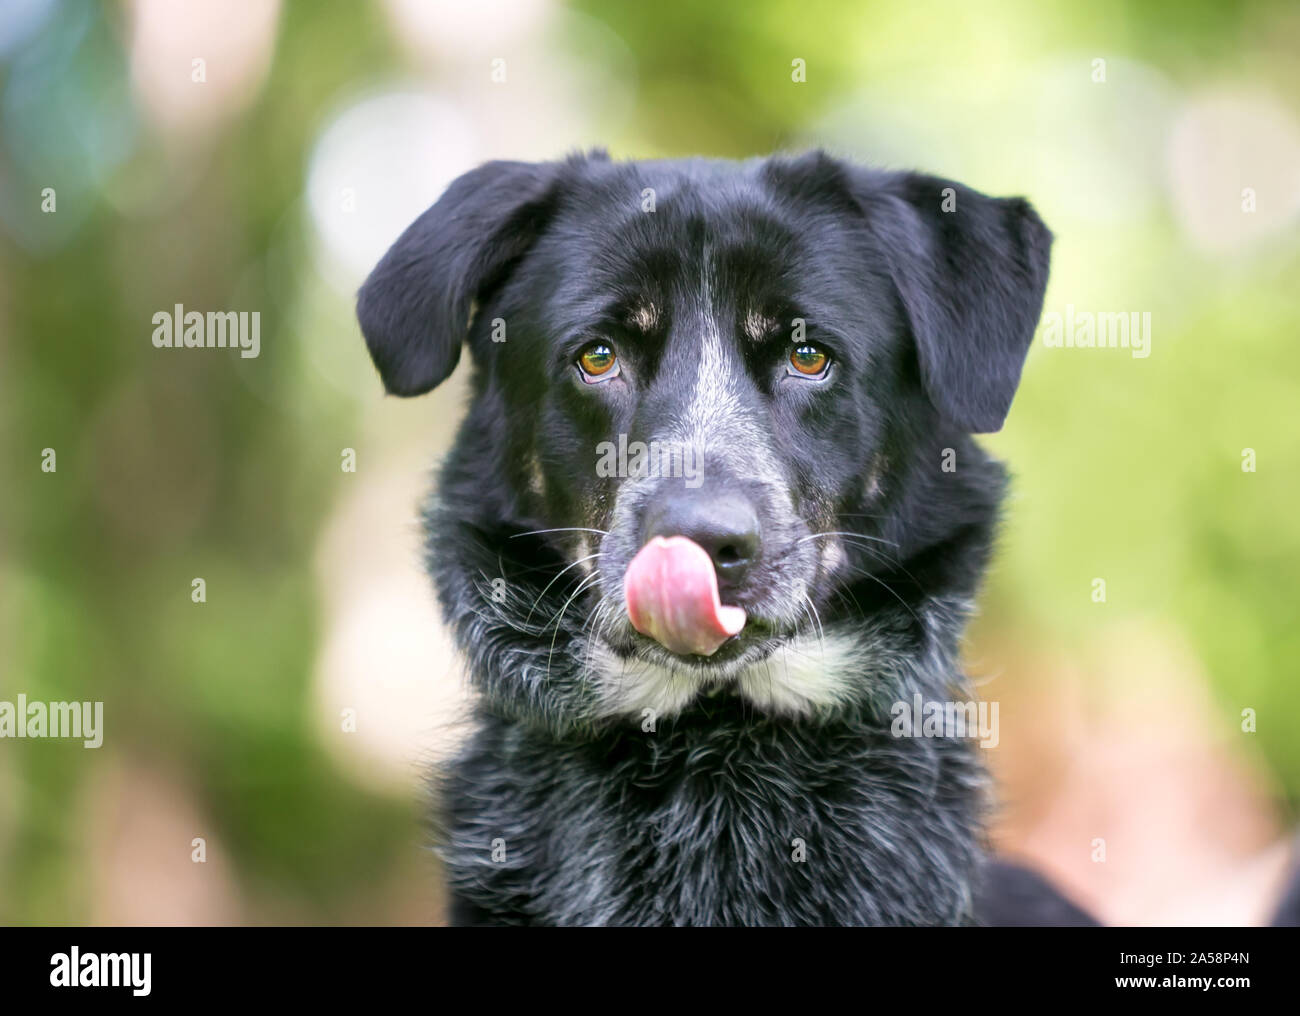 A Border Collie / Australian Cattle Dog mixed breed dog licking its lips Stock Photo